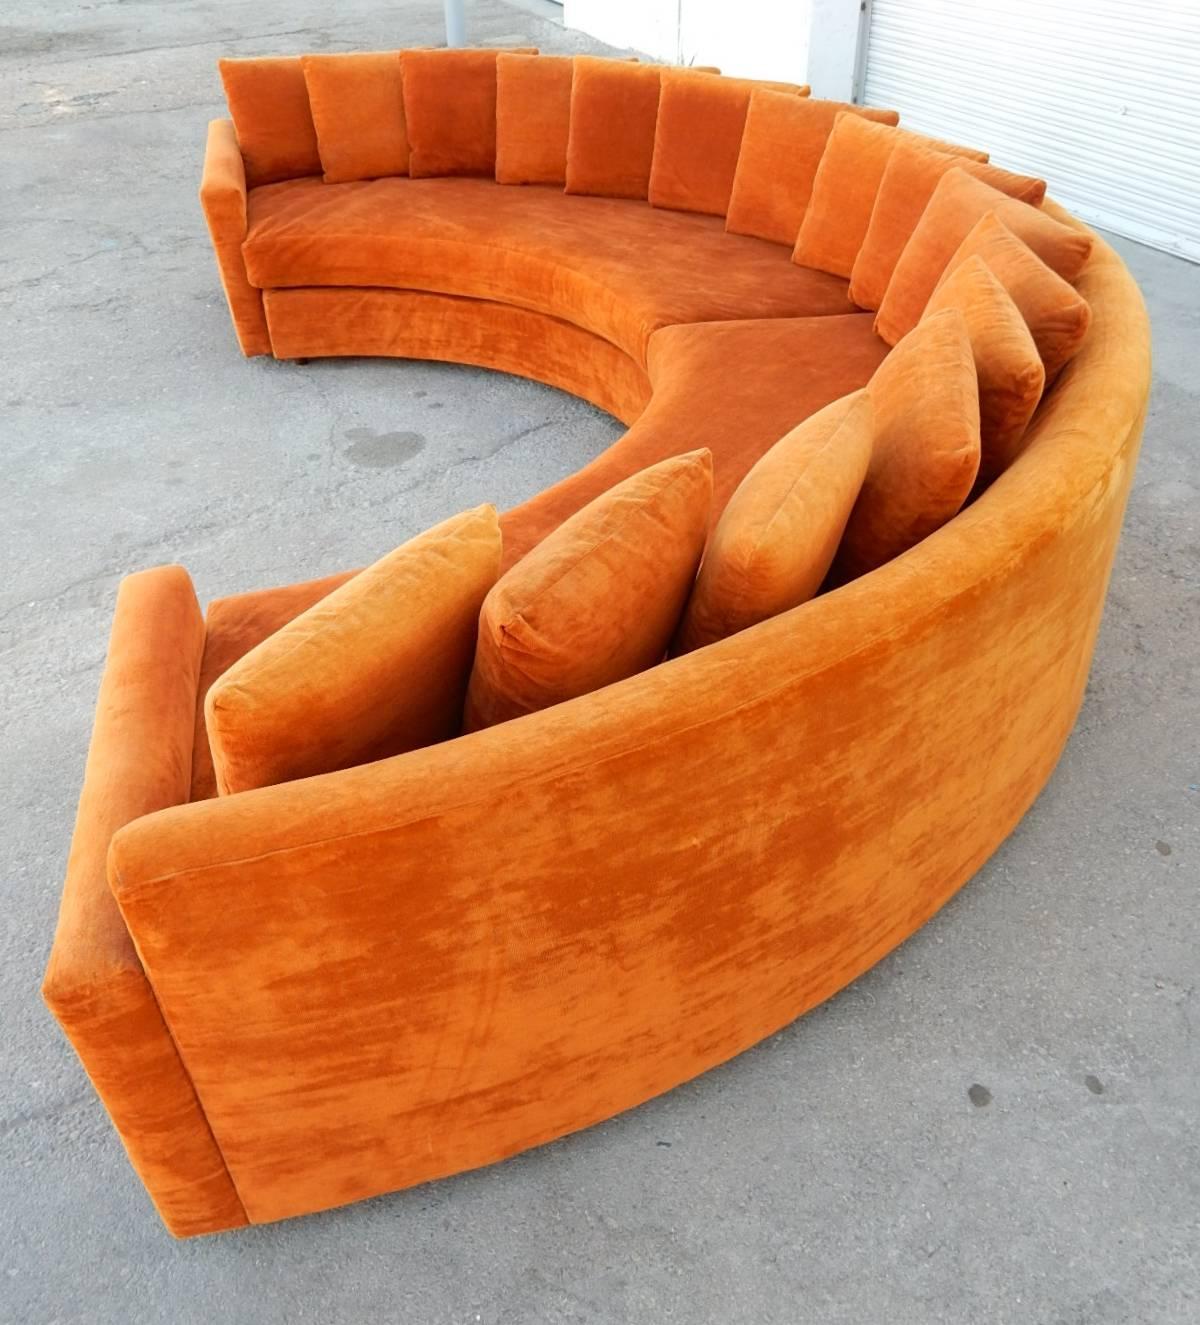 Epic circa 1970s burnt orange velvet half round sofa by 21st Century Furniture for Barker Bros. 16 pillow back.
At 12 feet long across the arms this is a statement piece of grandest proportions.
Sets of round stubby wood legs.
It is in excellent